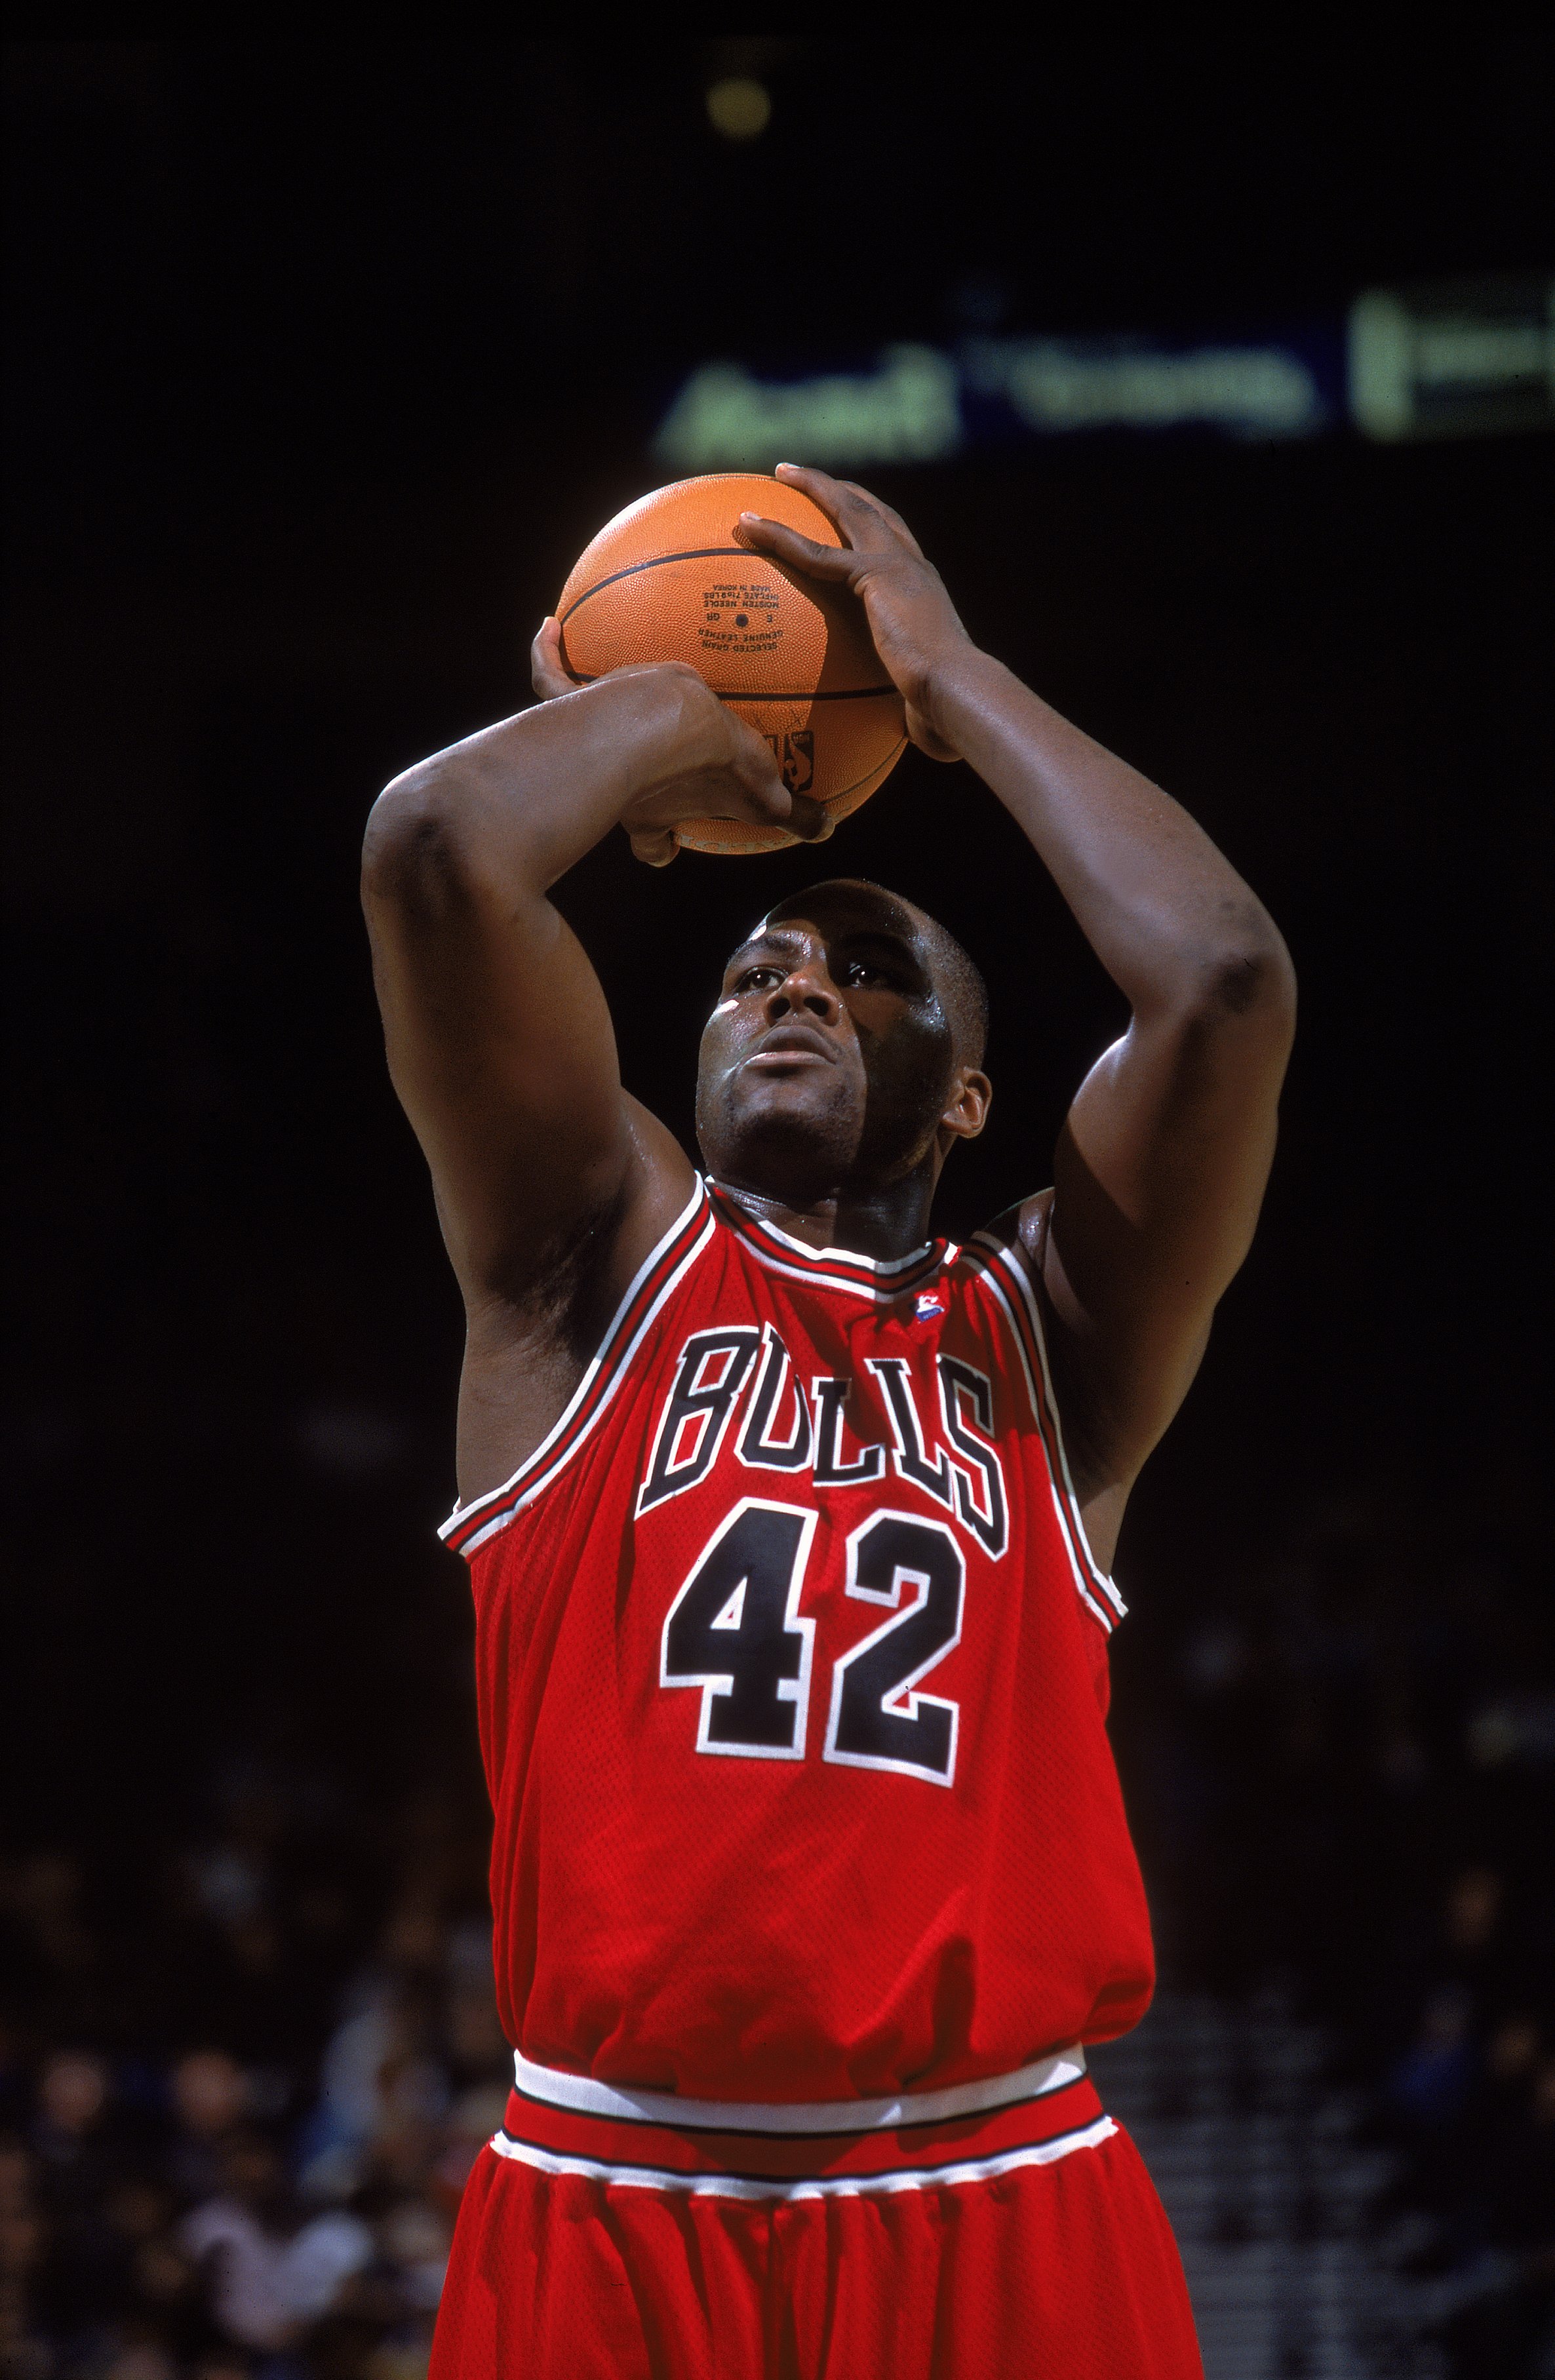 Golden Bulls: The Top 25 Greatest Chicago Bulls of All Time